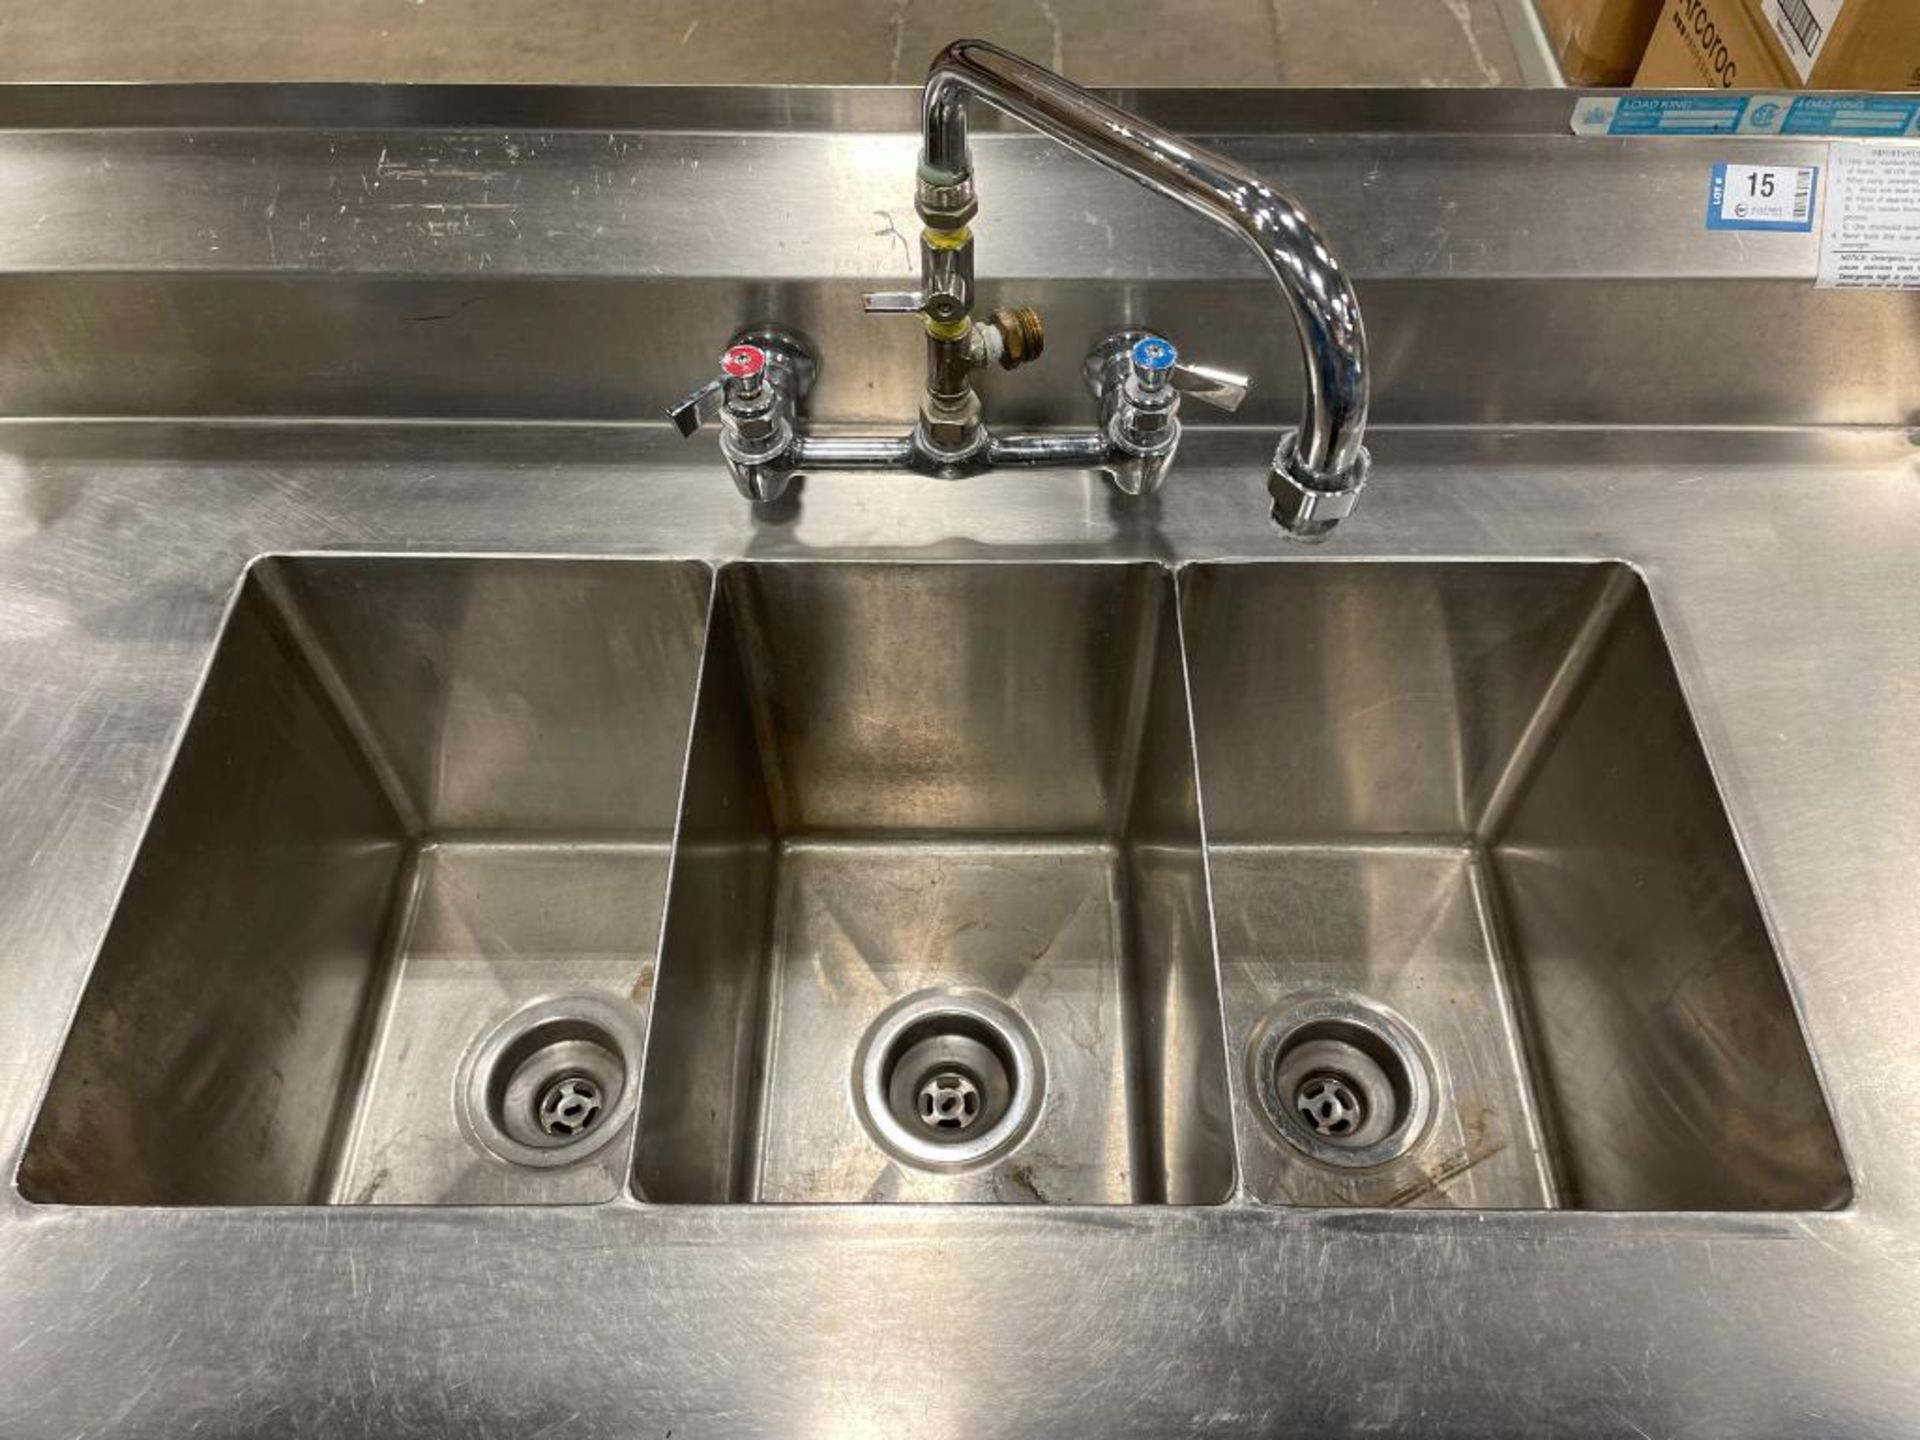 3 COMPARTMENT STAINLESS STEEL SINK W/ TAPS & DUAL DRAINBOARDS - Image 2 of 8